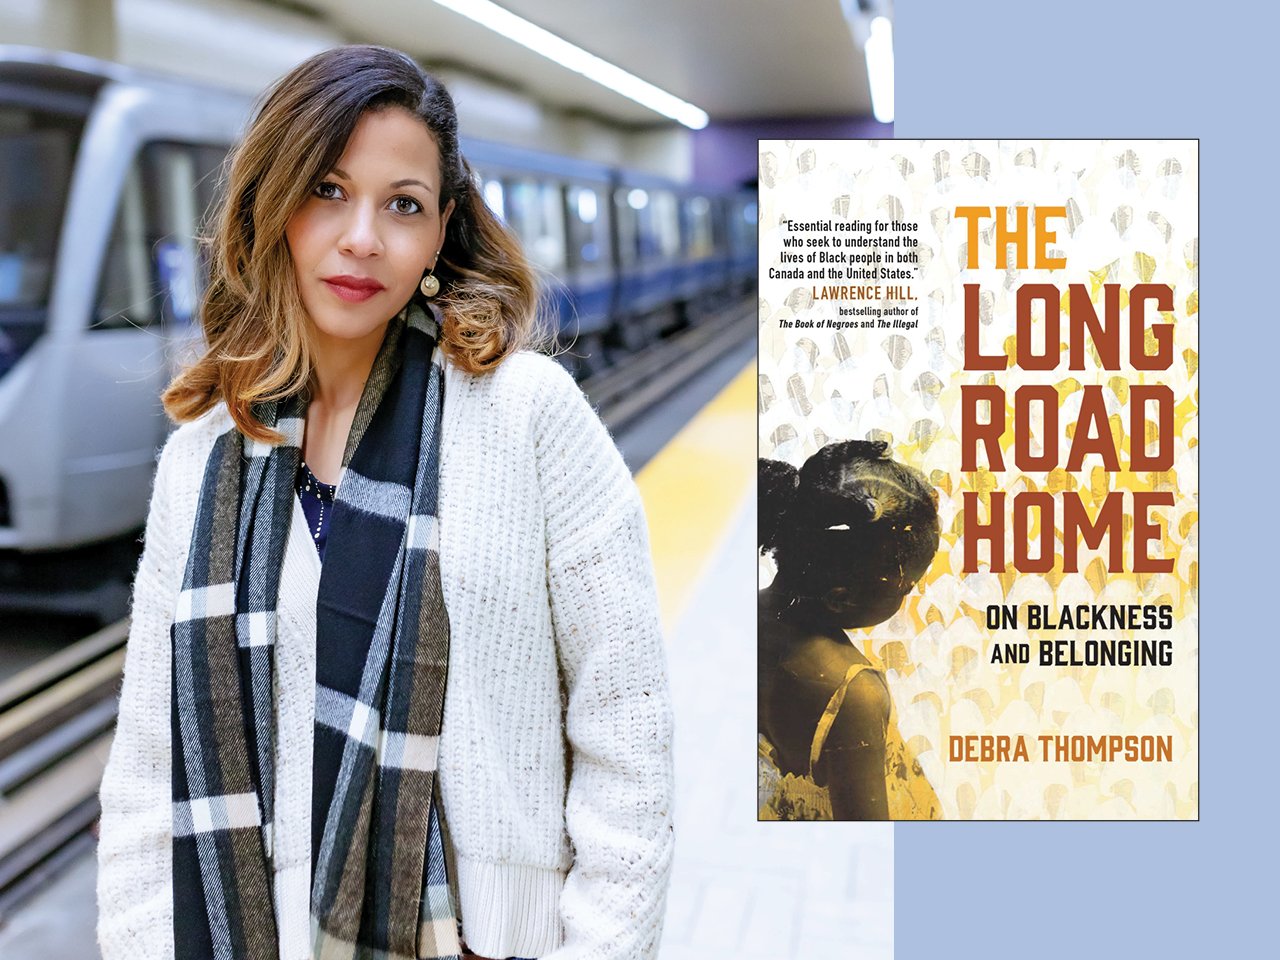 The cover of the book The Long Road Home, combined with a photo of the author, Debra Thompson